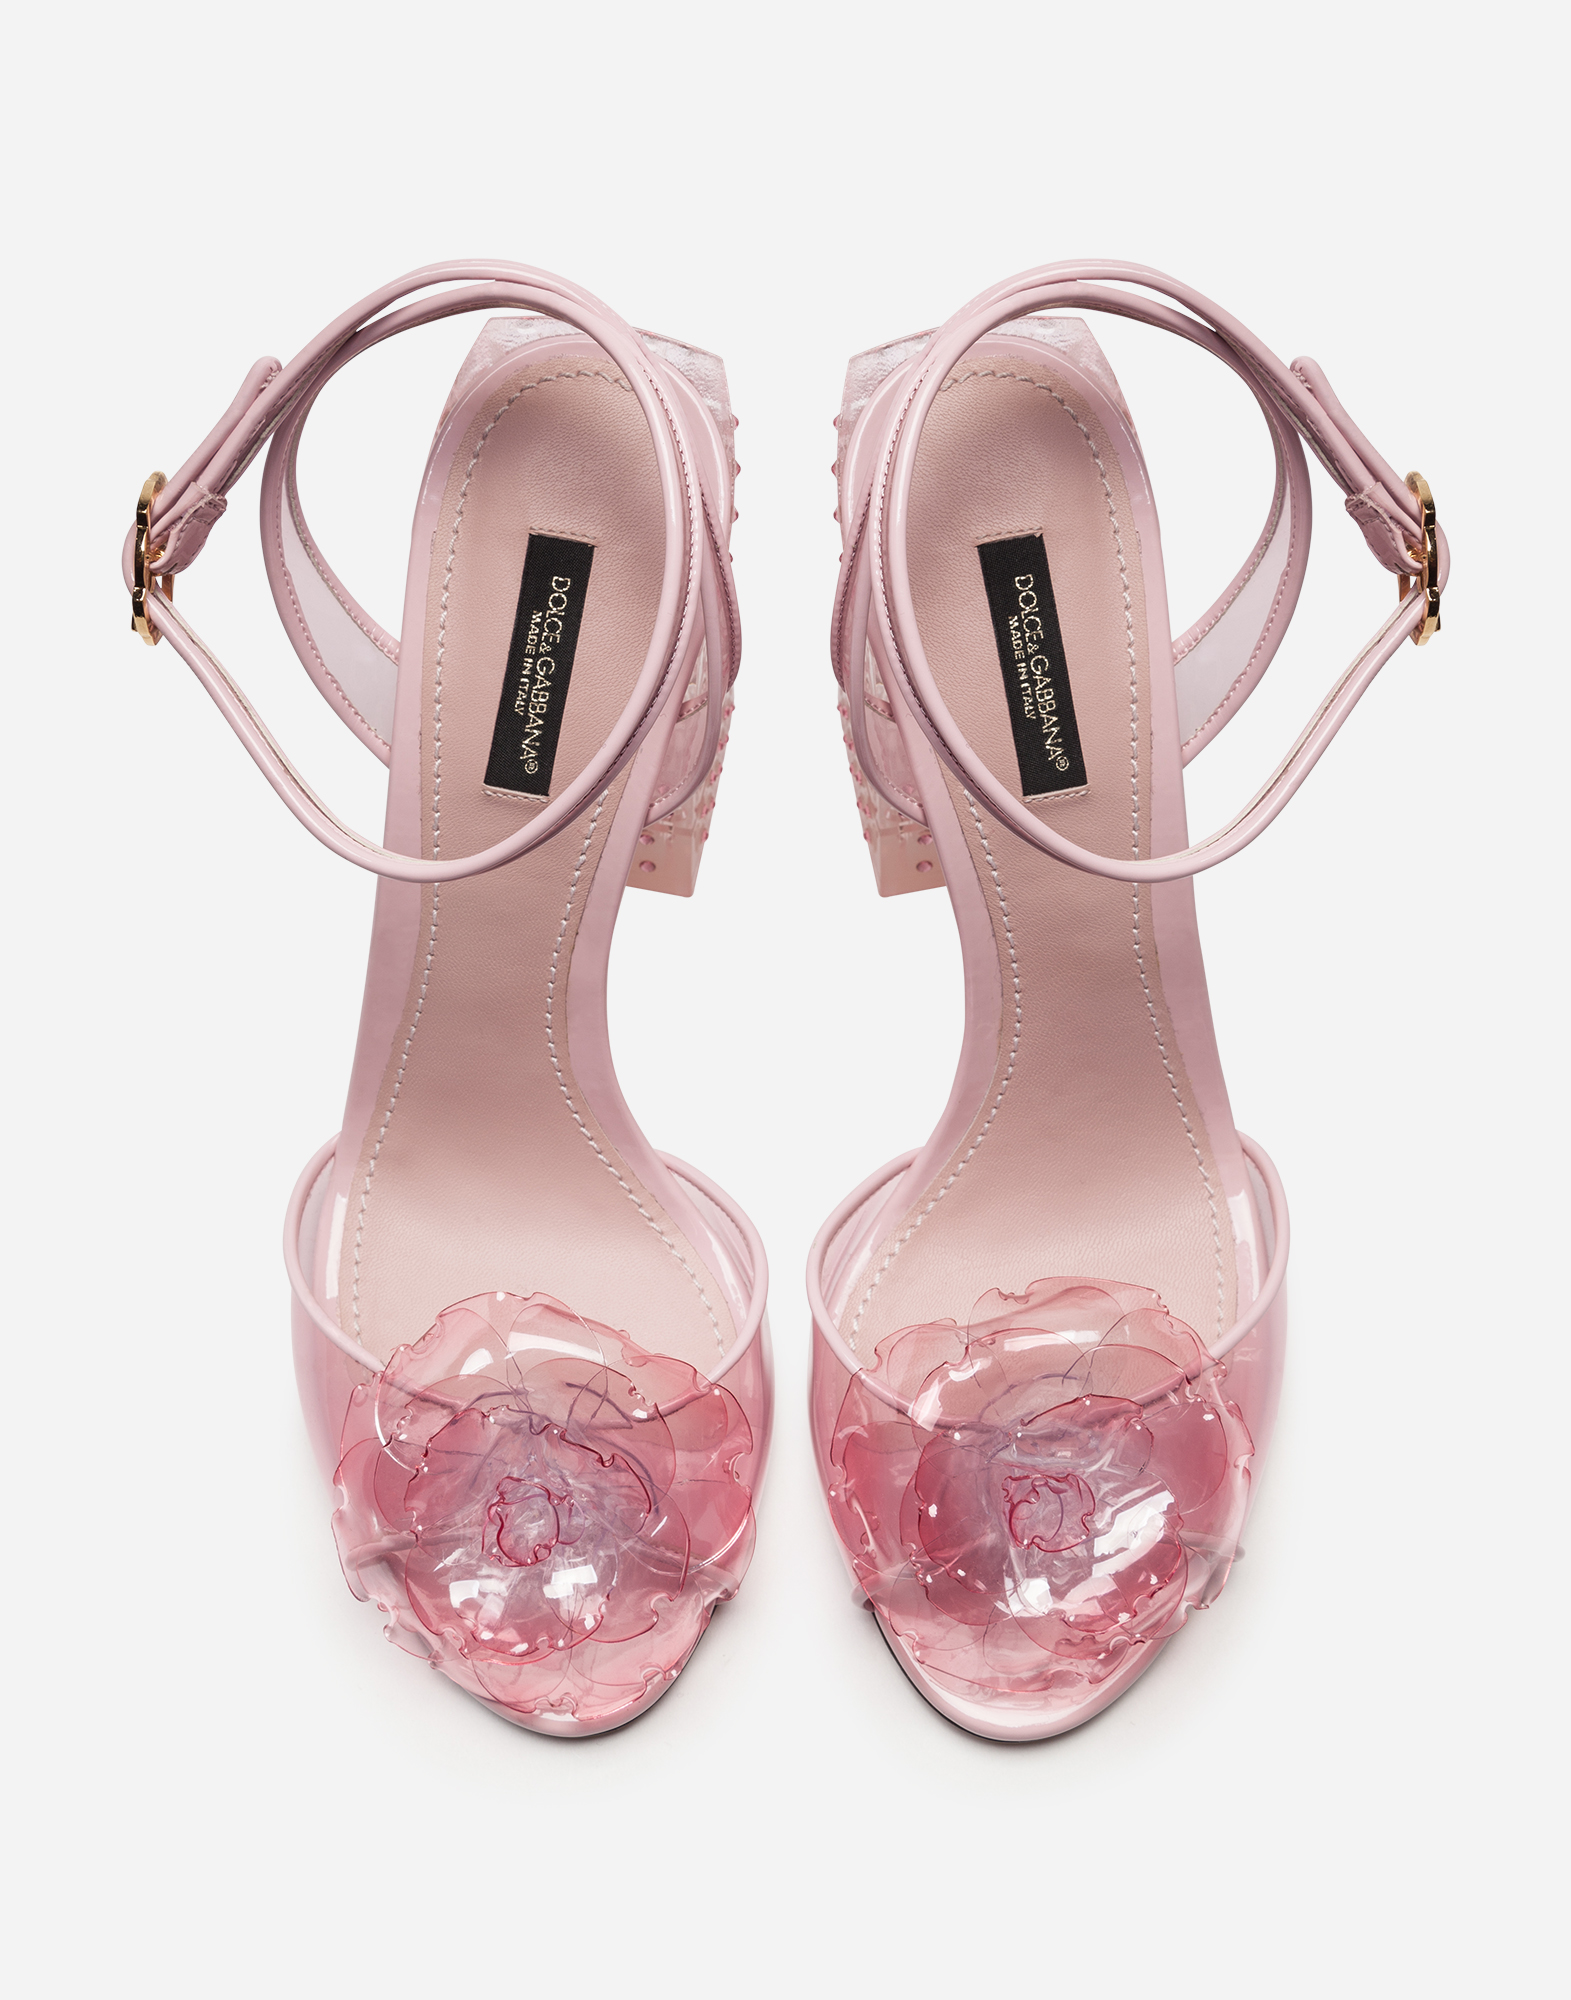 dolce and gabbana transparent shoes